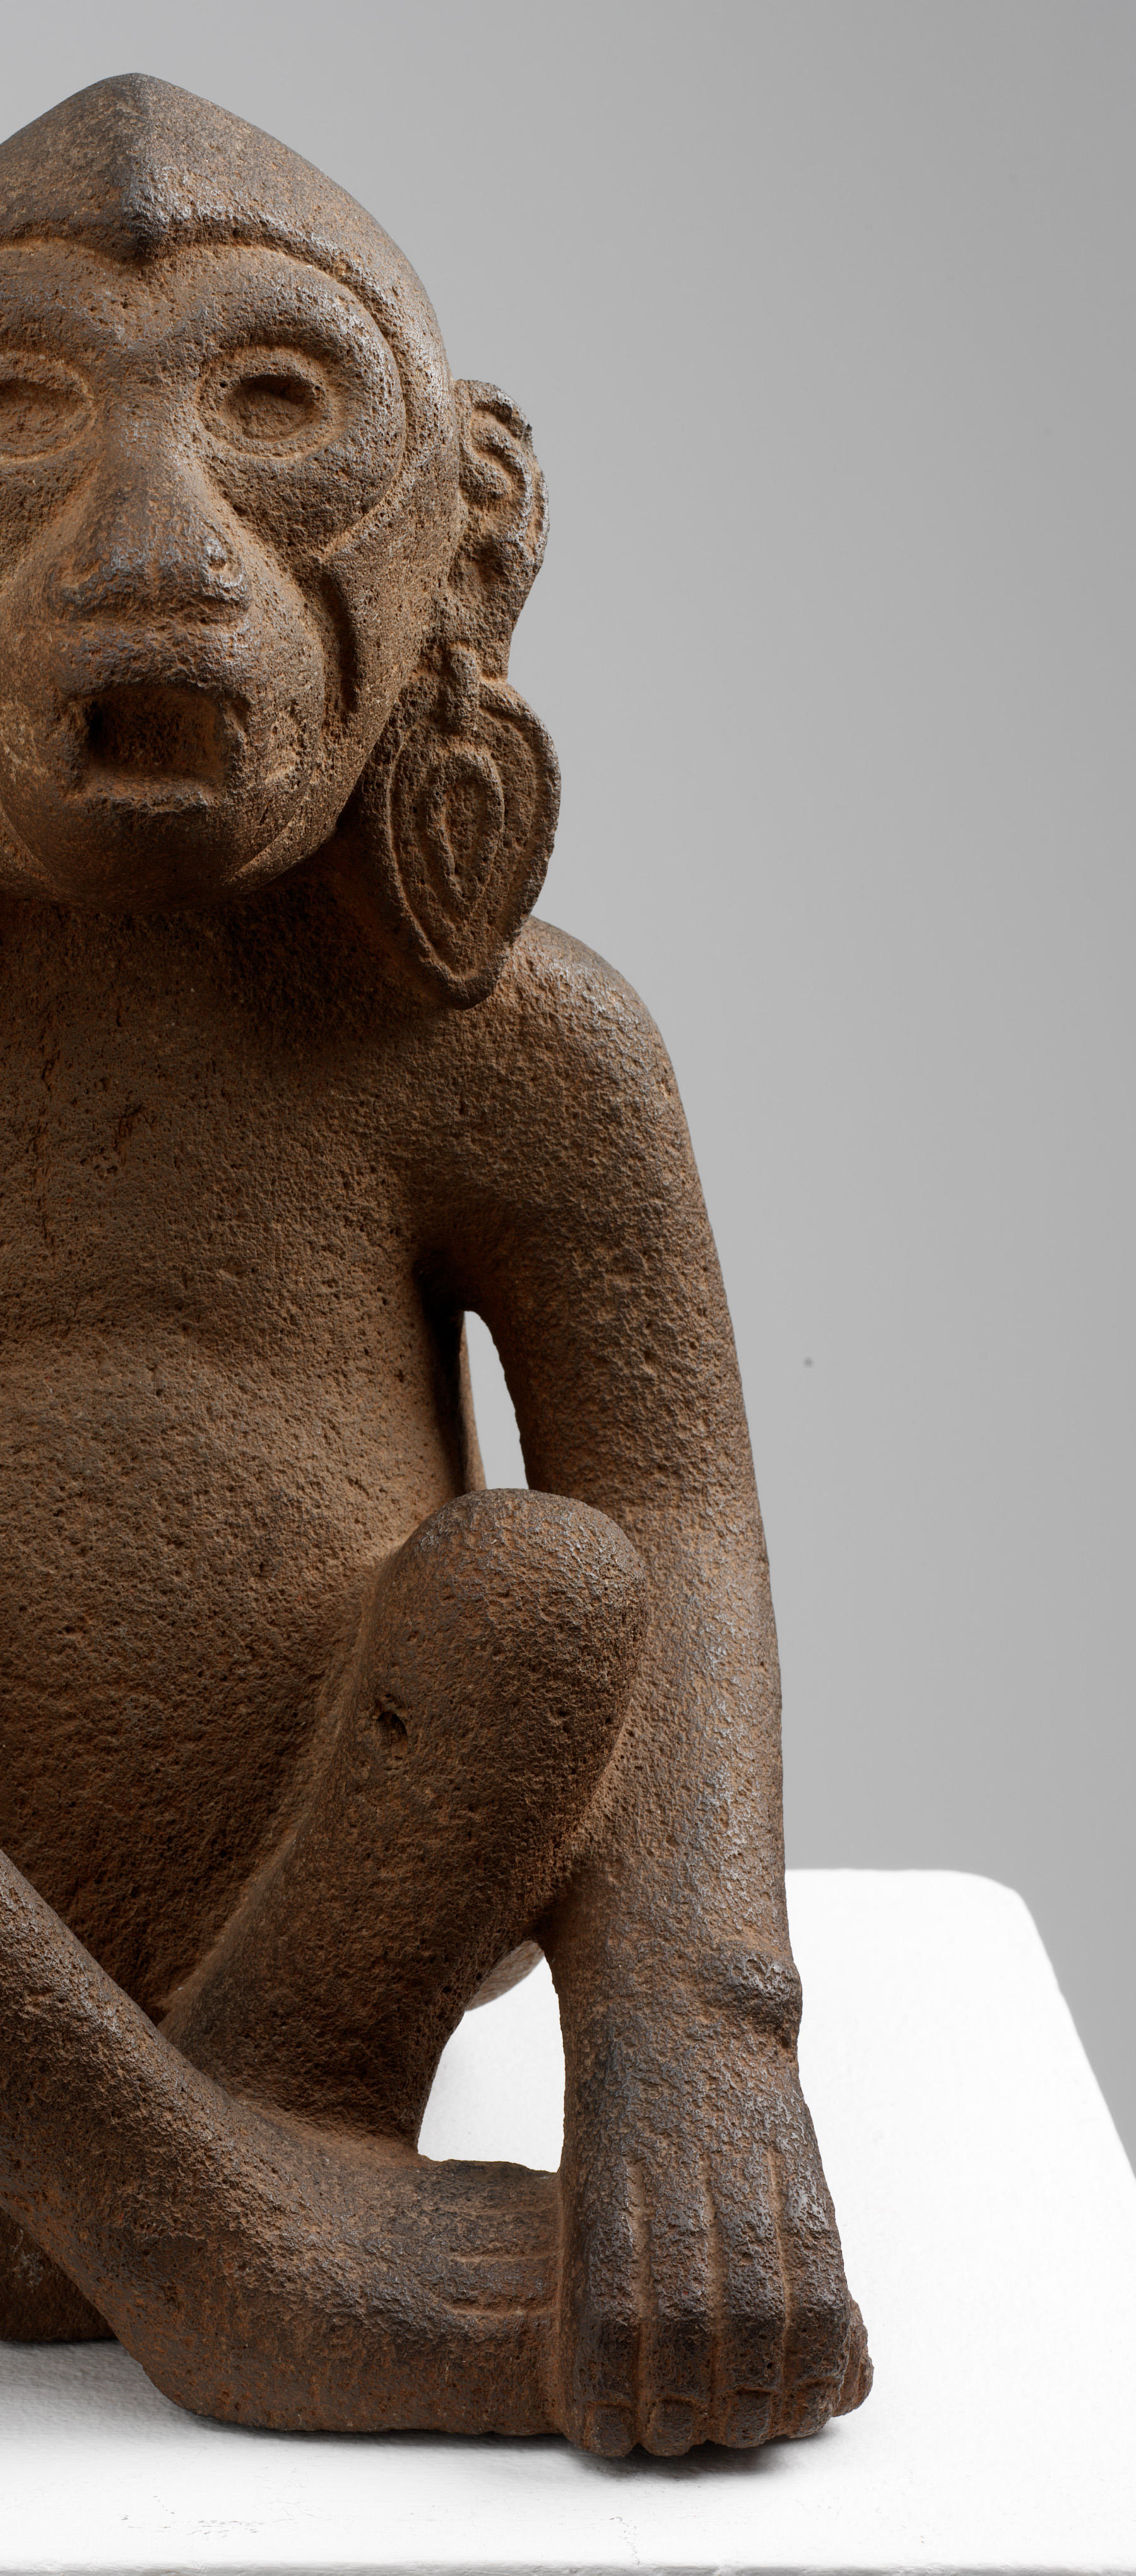 Cutoff view of the front right-side of a brown monkey sculpture sitting cross-legged with one hand gripping its foot. Its hands and toes are engraved to delineate toes and fingers.